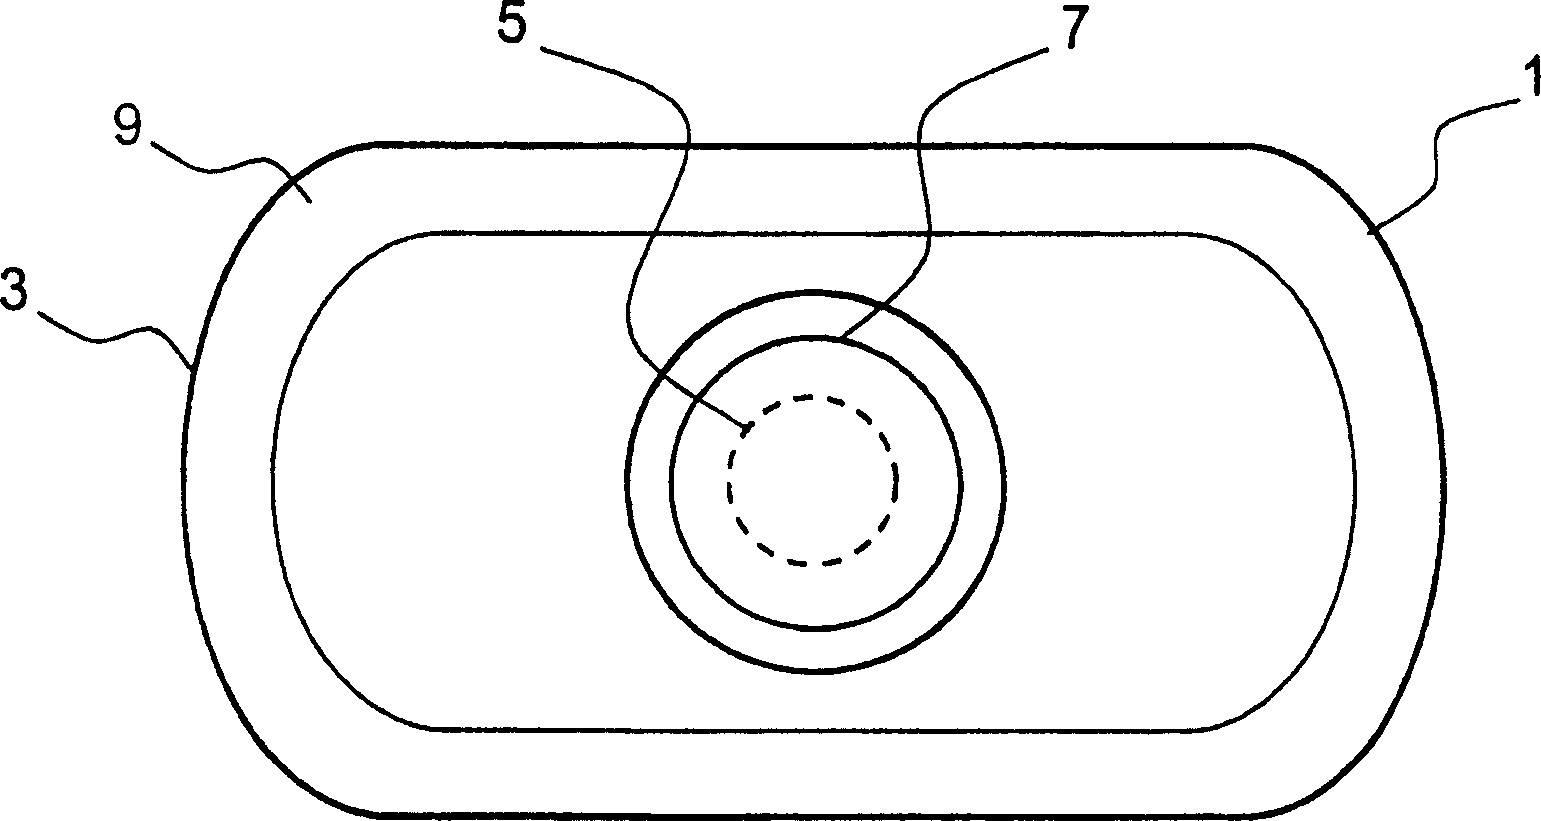 Post patch for mounting devices inside tires